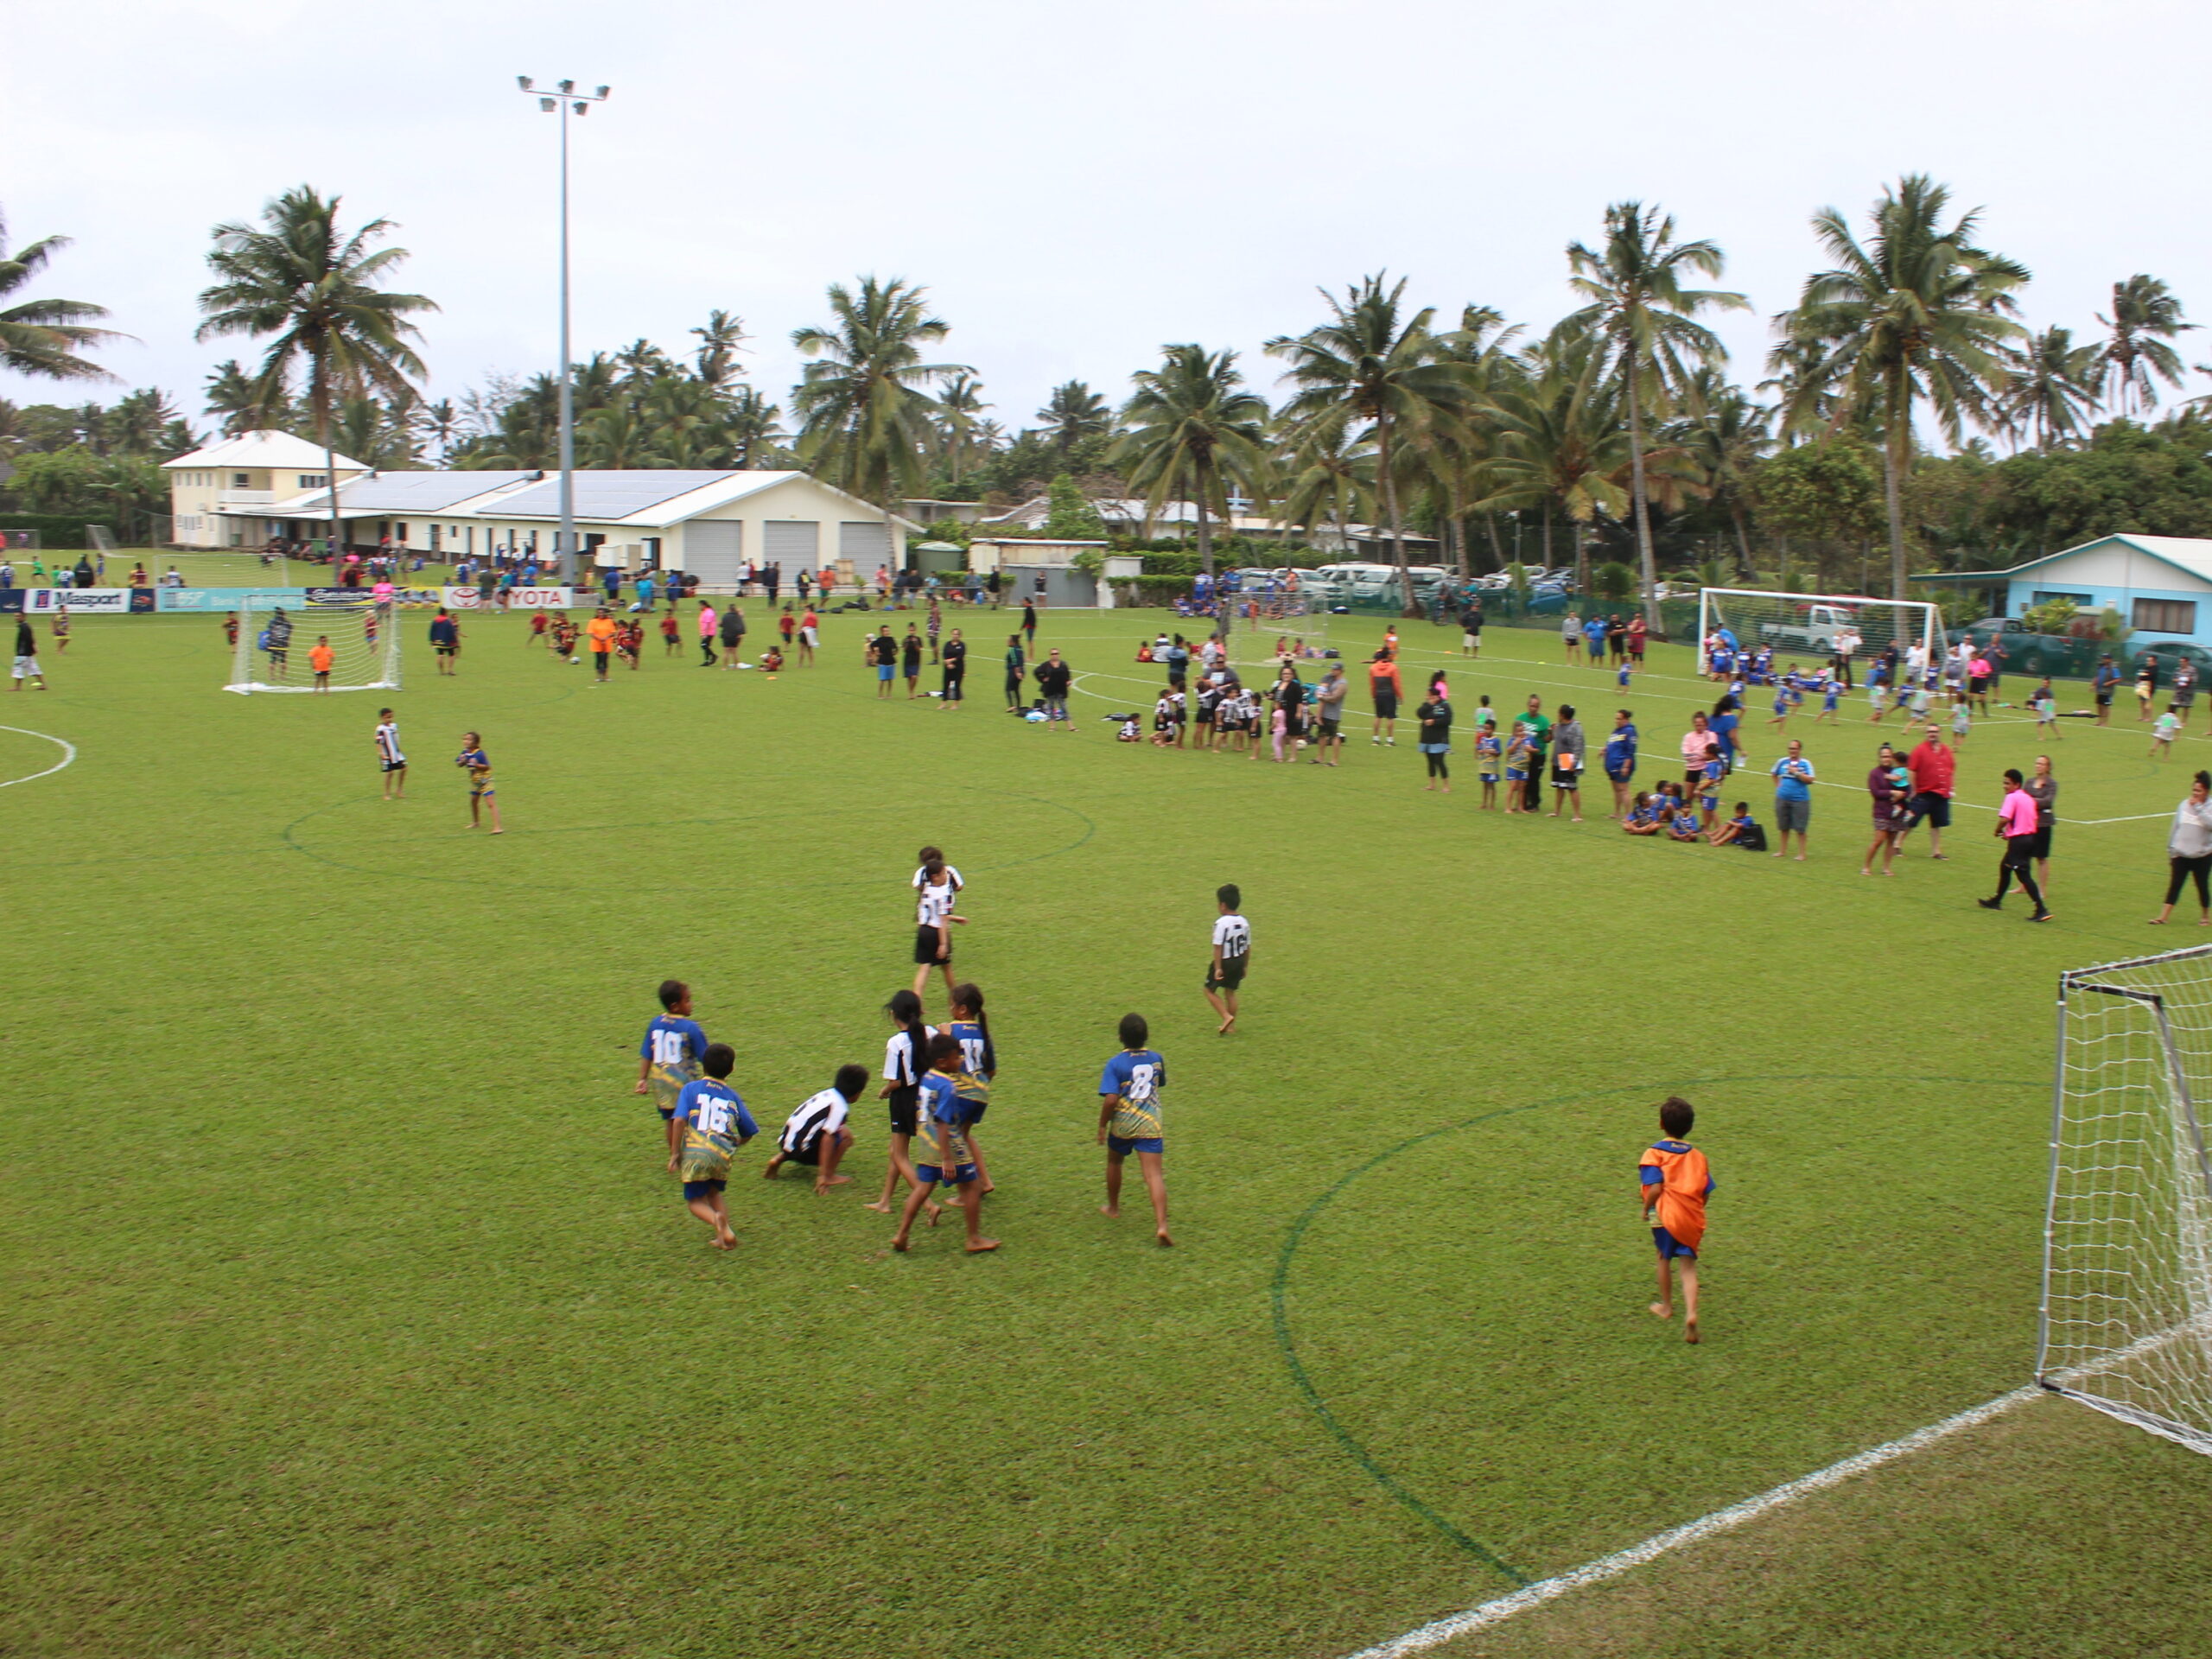 Grassroots celebrations in Round 15 of football competition